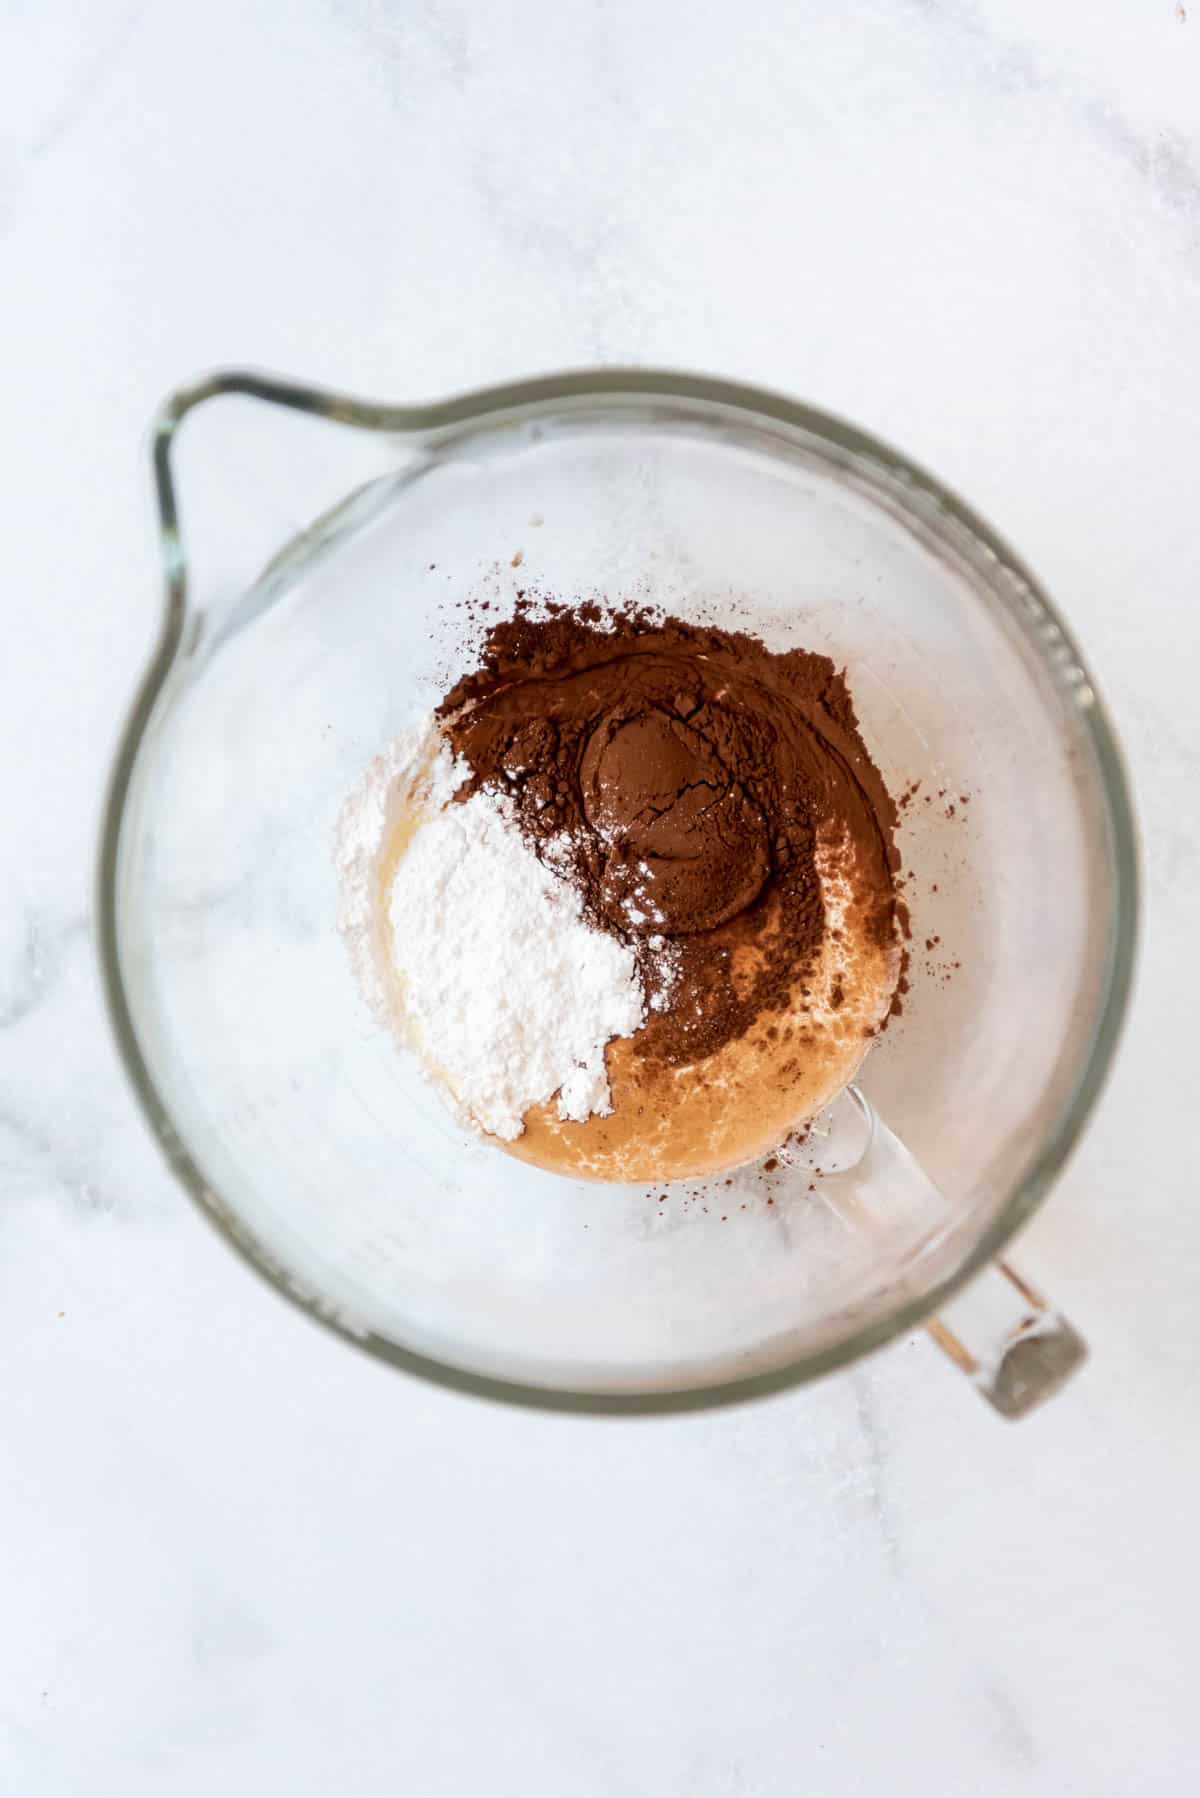 Combining sugar, cream, cocoa powder, and vanilla extract in a glass mixing bowl.